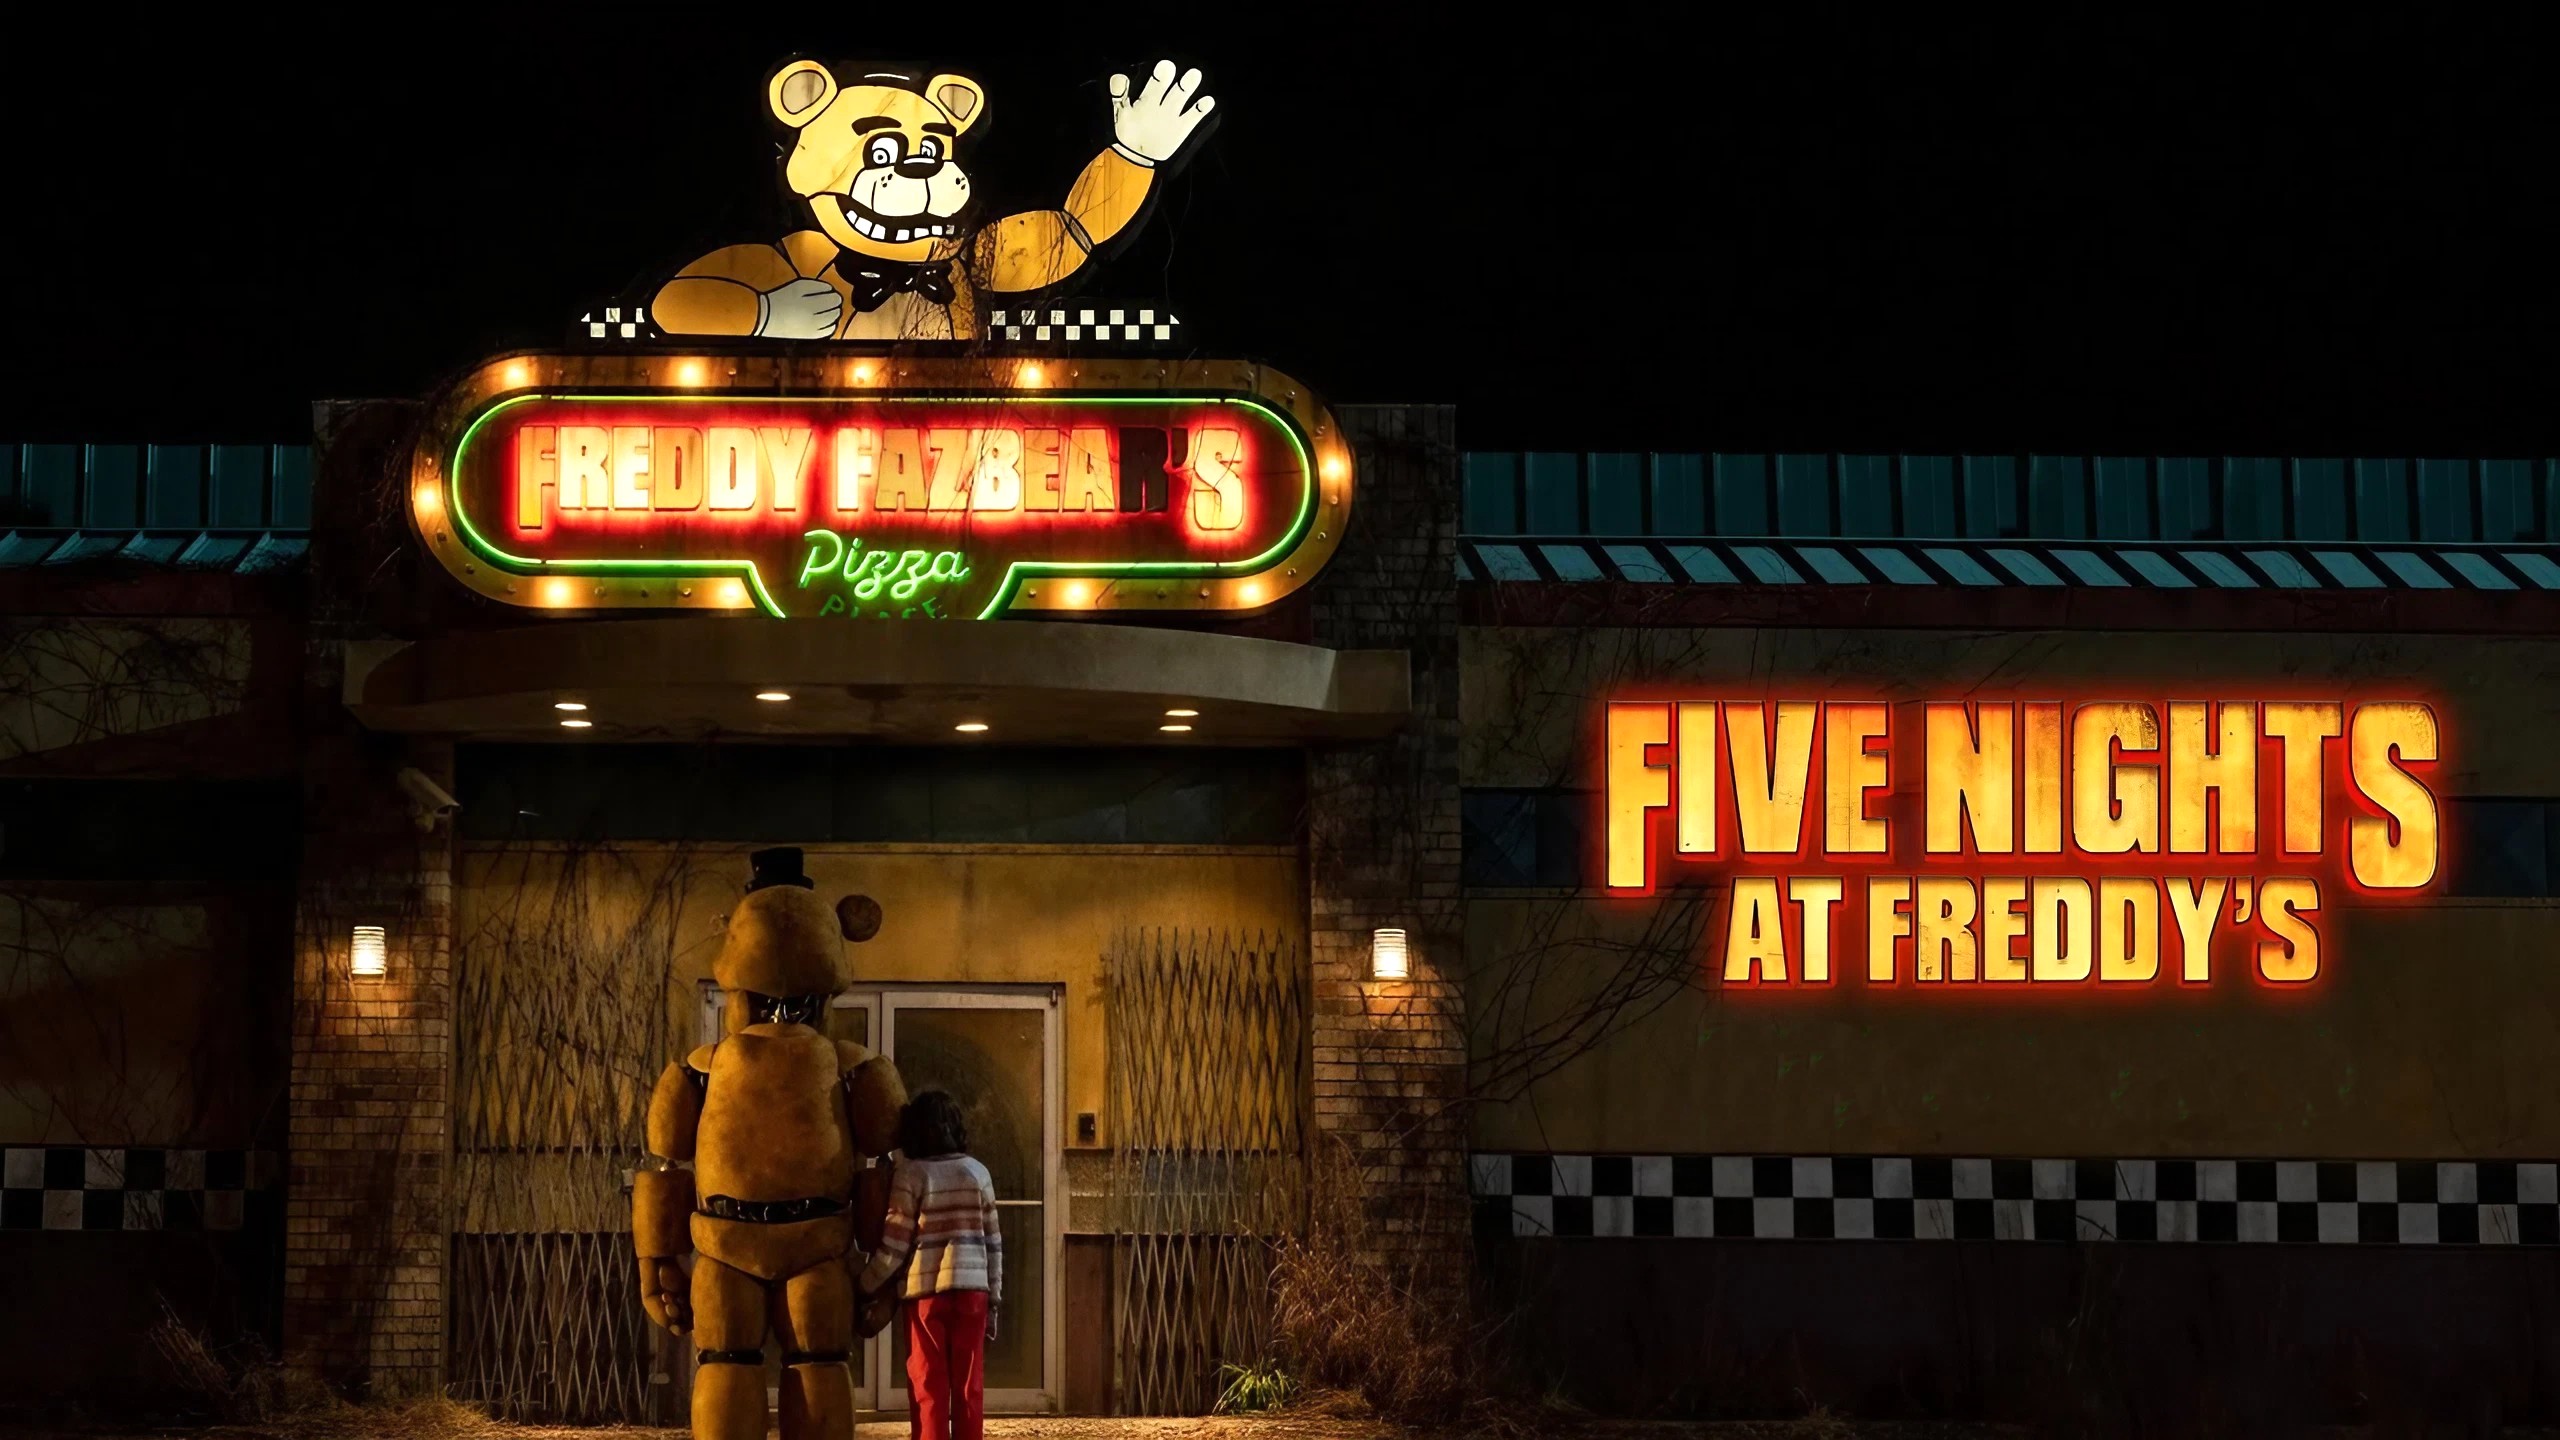 Is Five Nights At Freddy’s Based On A Video Game?